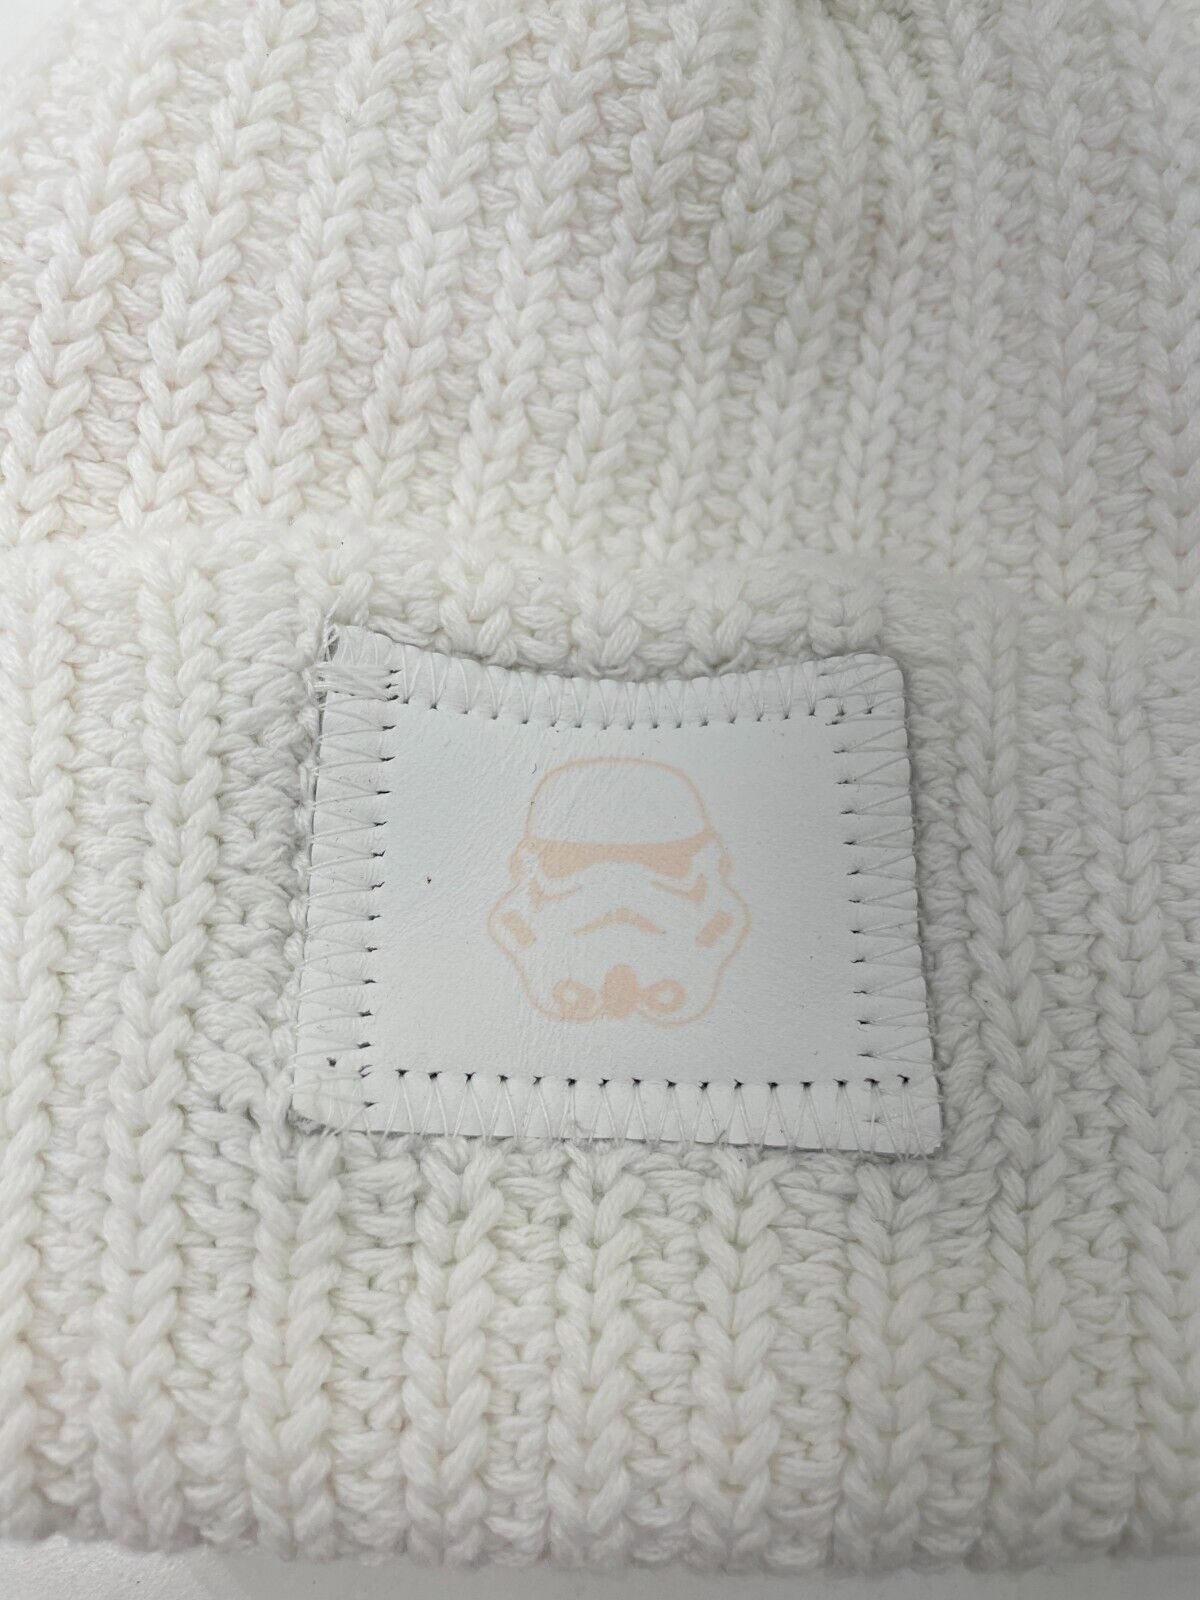 Star Wars x Love Your Melon Stormtrooper Adult Pom Beanie White Knitted Cuffed